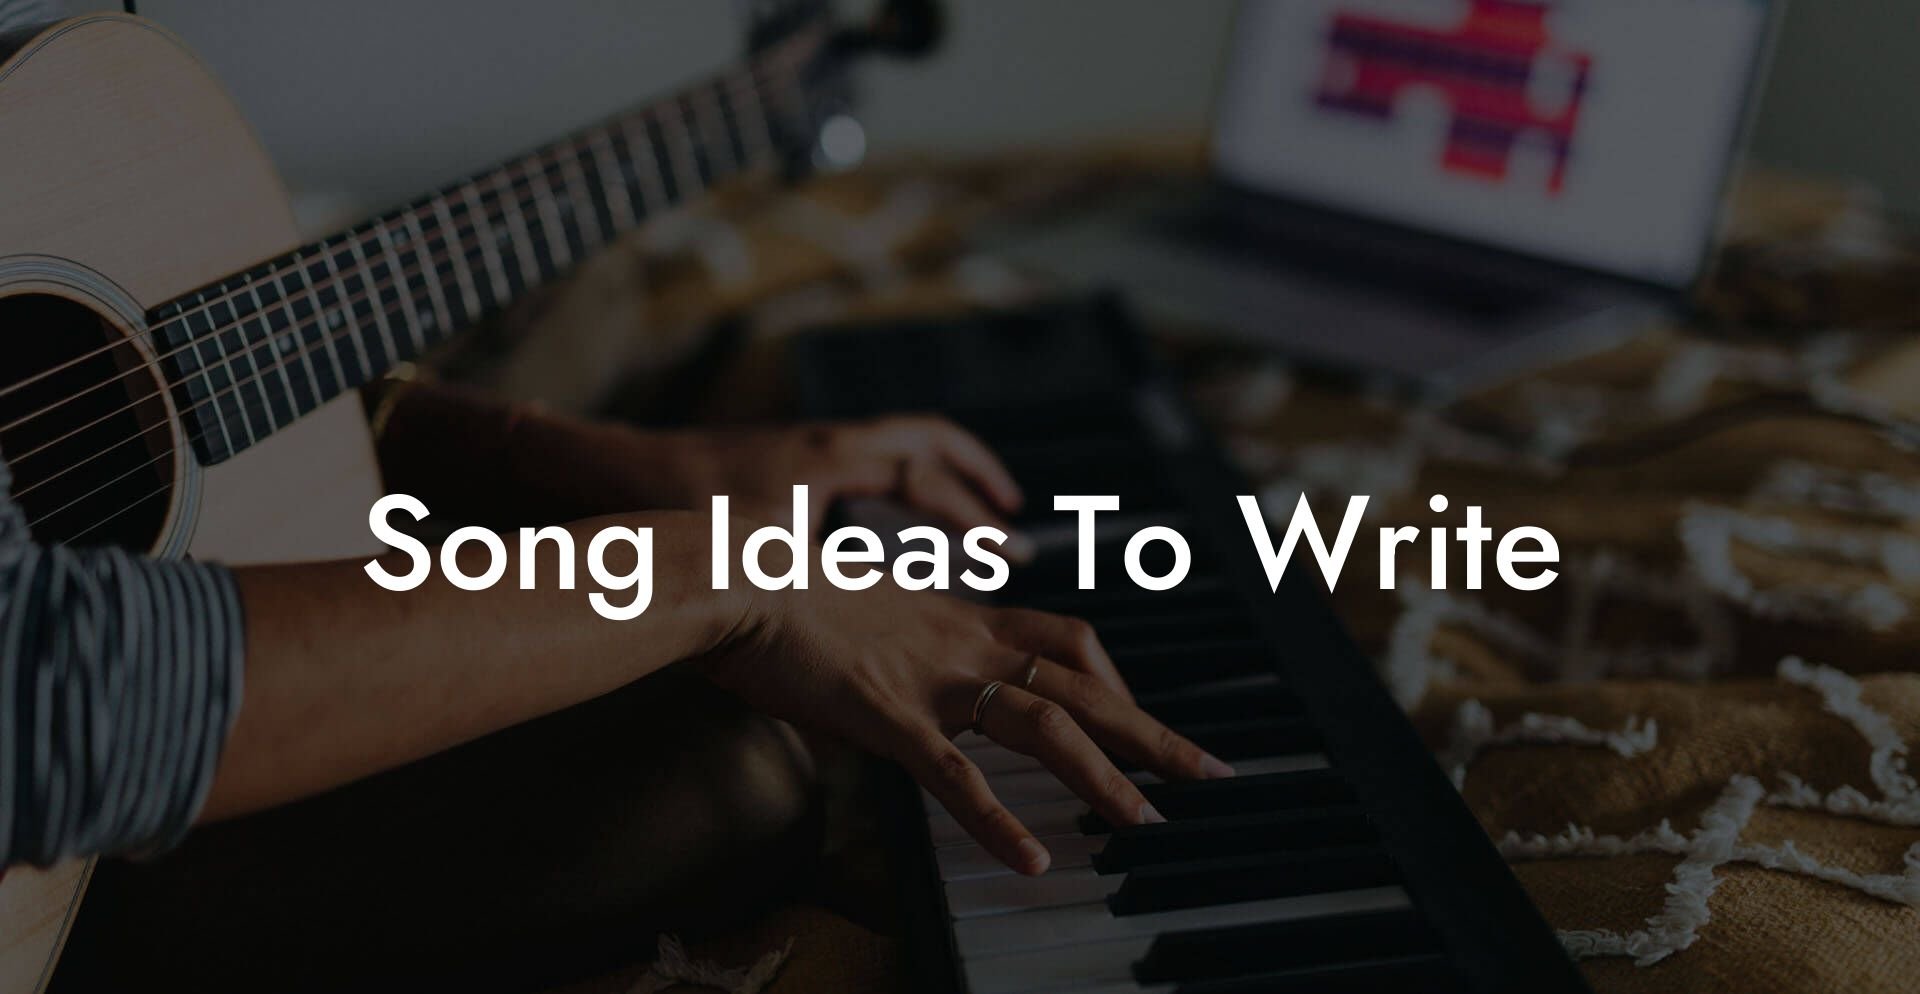 song ideas to write lyric assistant